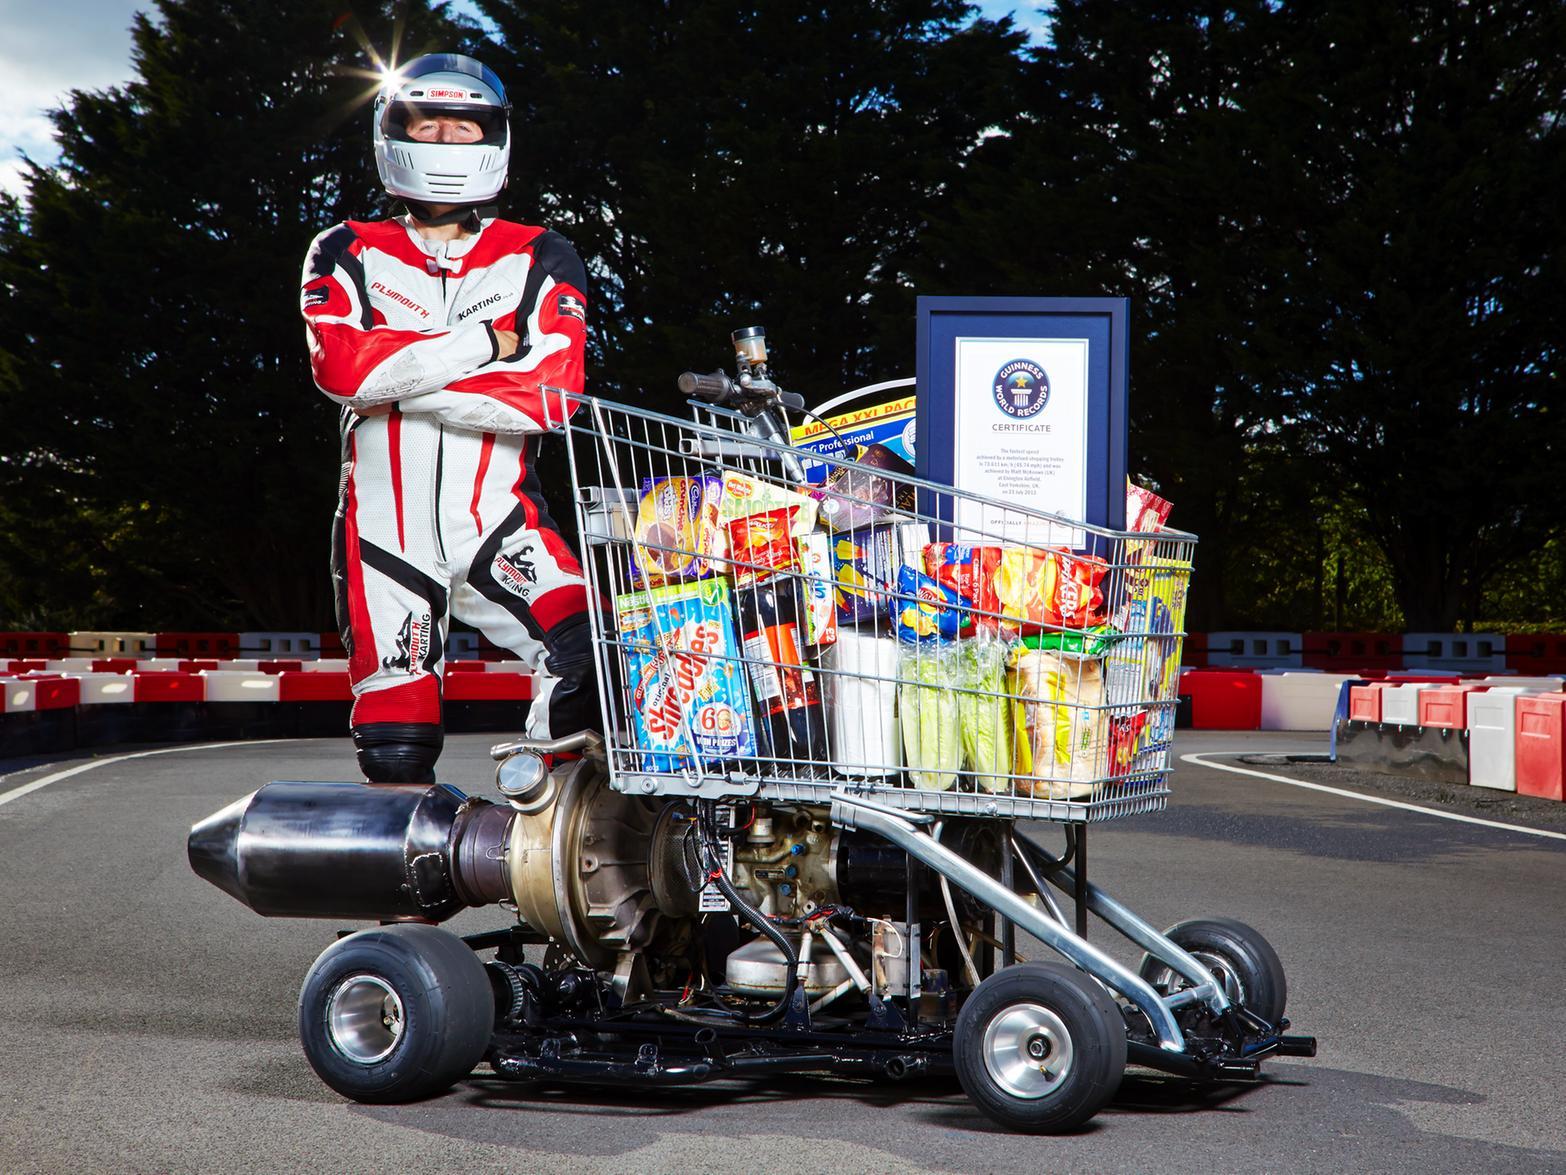 The fastest speed achieved by a motorized shopping trolley is 113.298 km/h (70.4 mph) by Matt McKeown (UK) at Elvington Airfield in East Yorkshire, UK, on 18 August 2013.